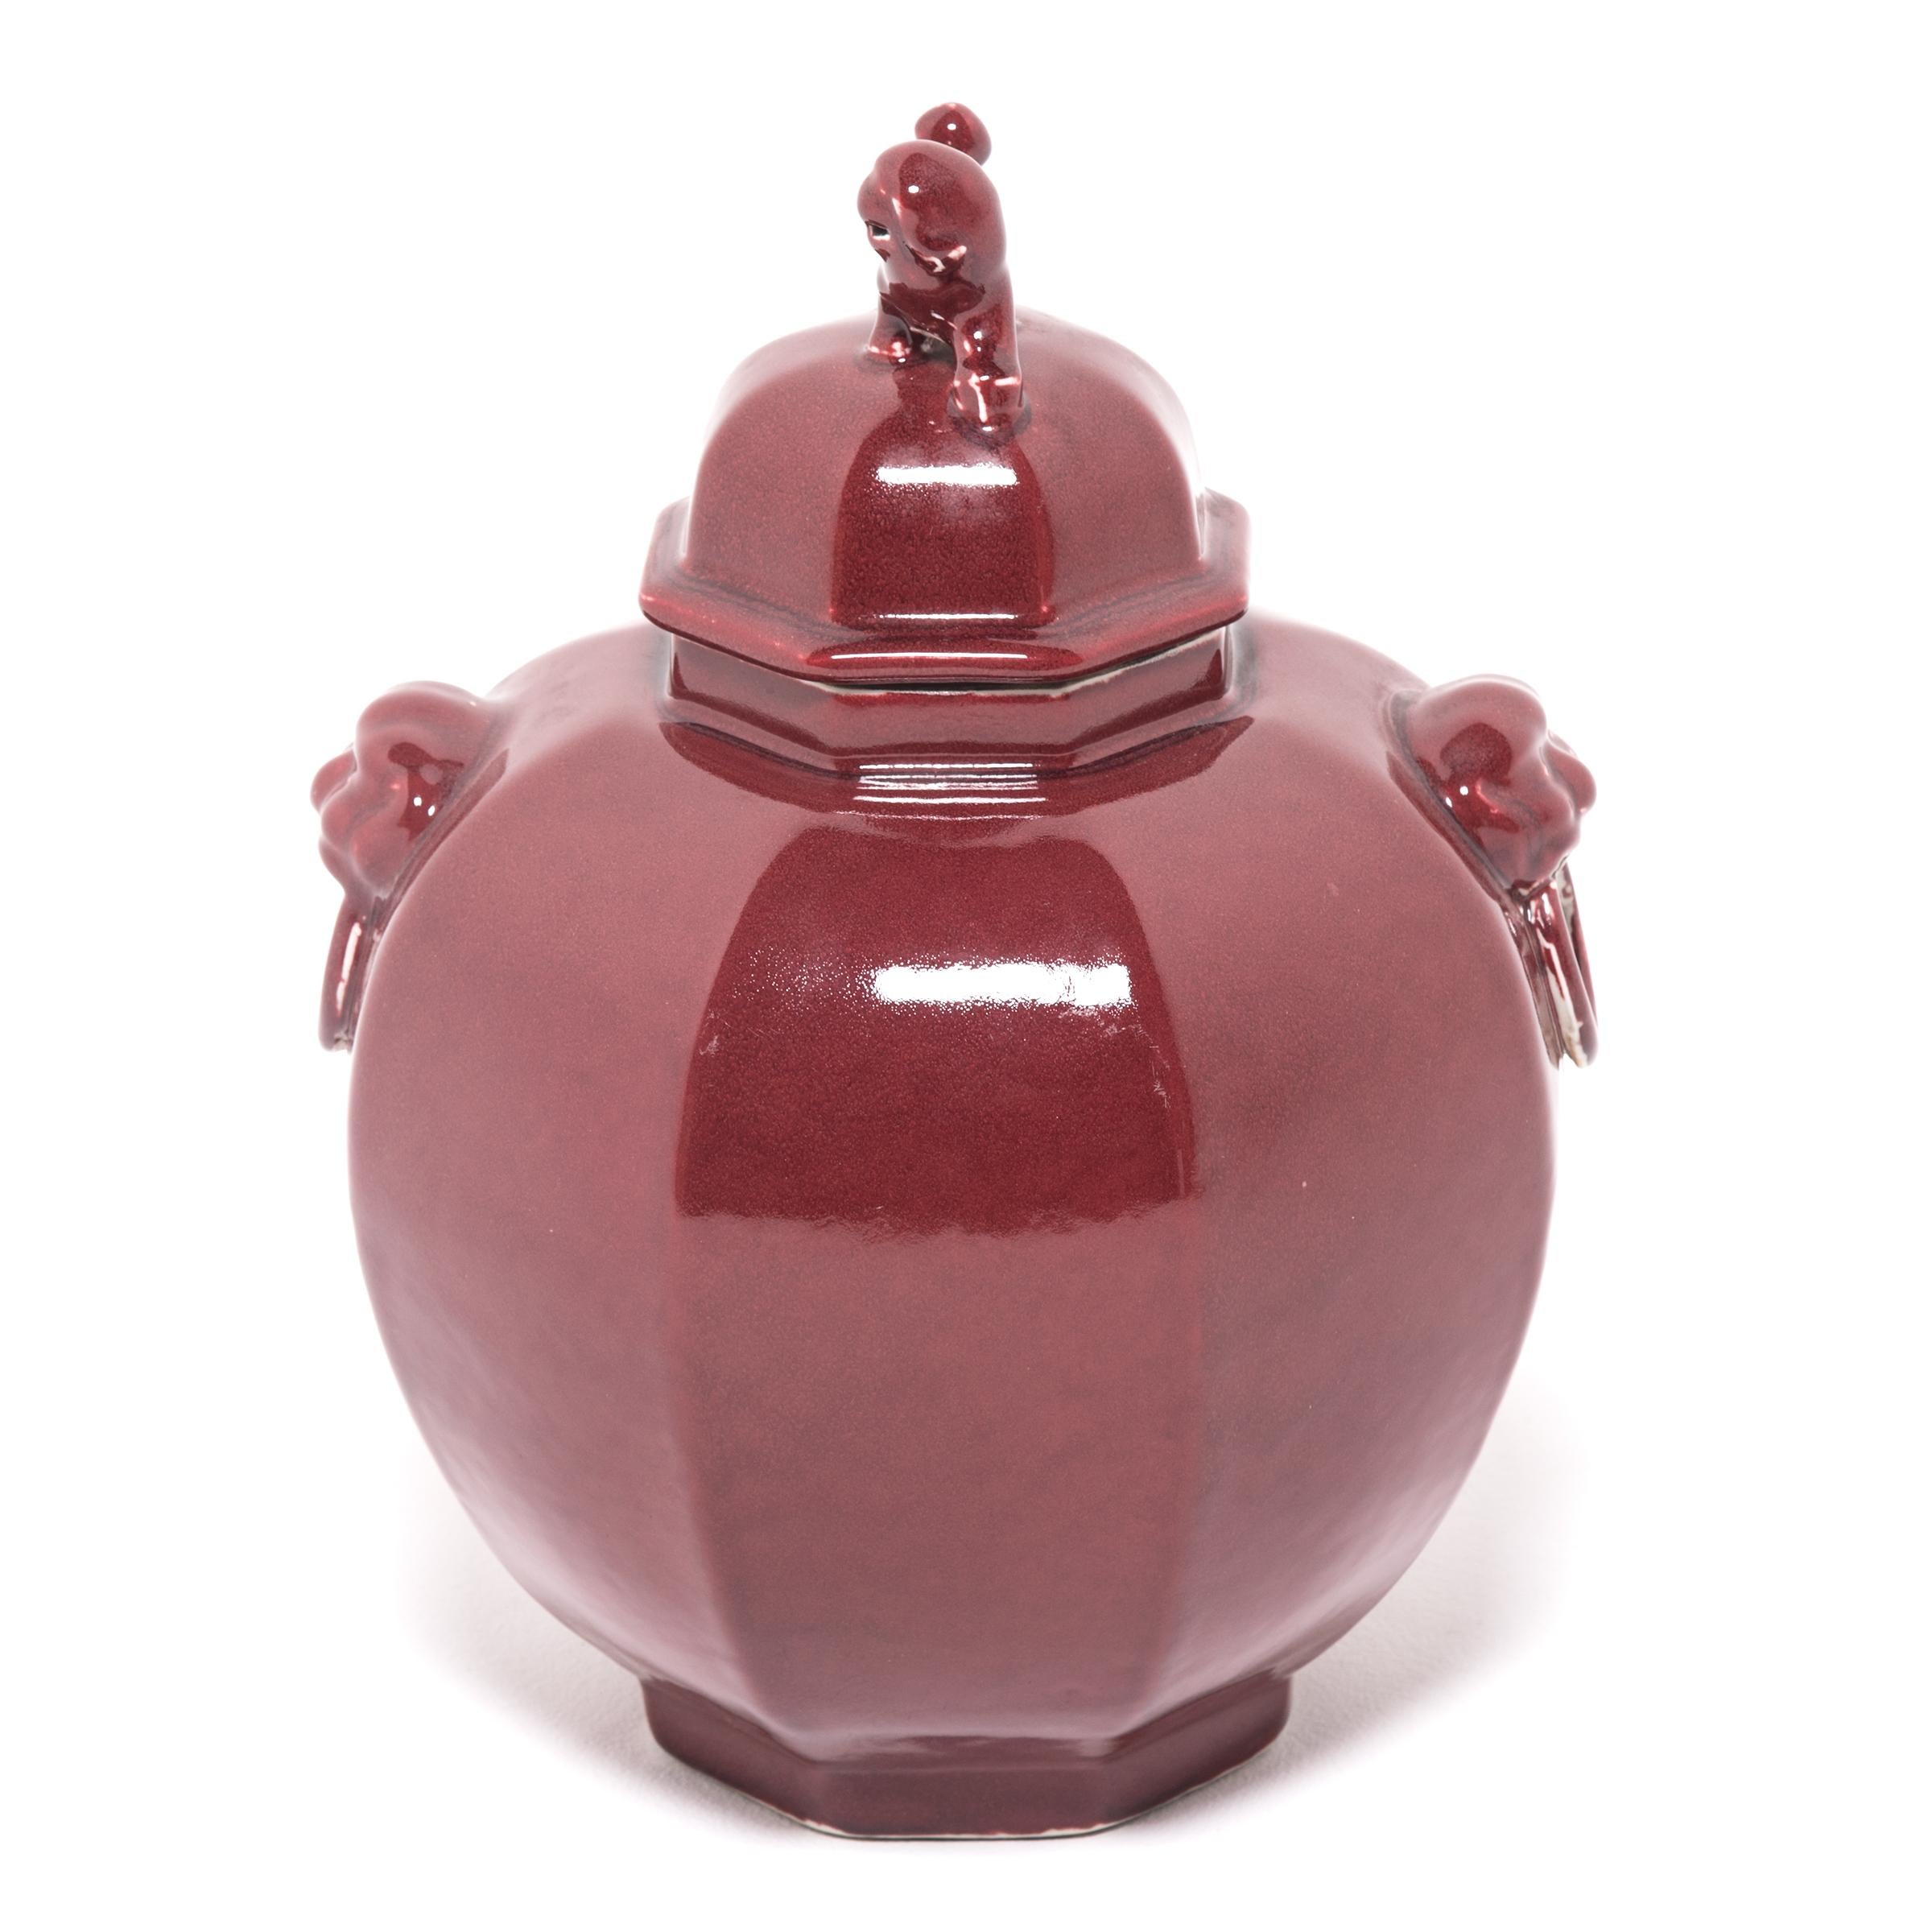 A rich, monochrome red glaze coats this ginger jar shaped contemporary vase, drawing attention to its updated profile and its sculptural Fu dog top. Referred to as shizi, these mythical, canine-like lions are natural protectors. Sculptures of these